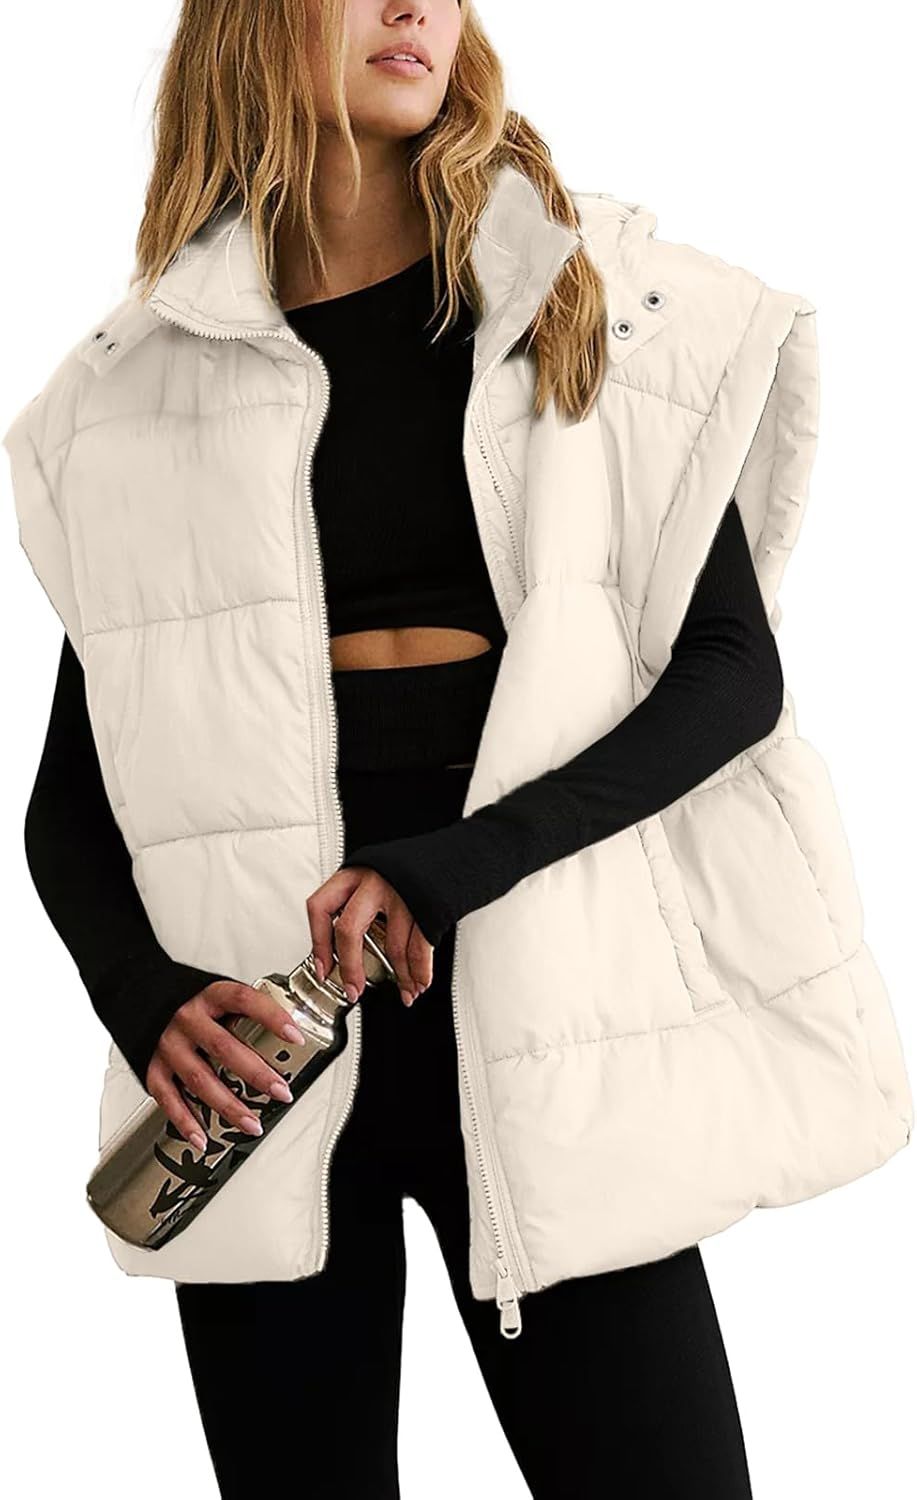 Women's Quilted Puffer Vest Lightweight Sleeveless Stand Collar Jackets Warm Puffy Padded Gilet | Amazon (US)